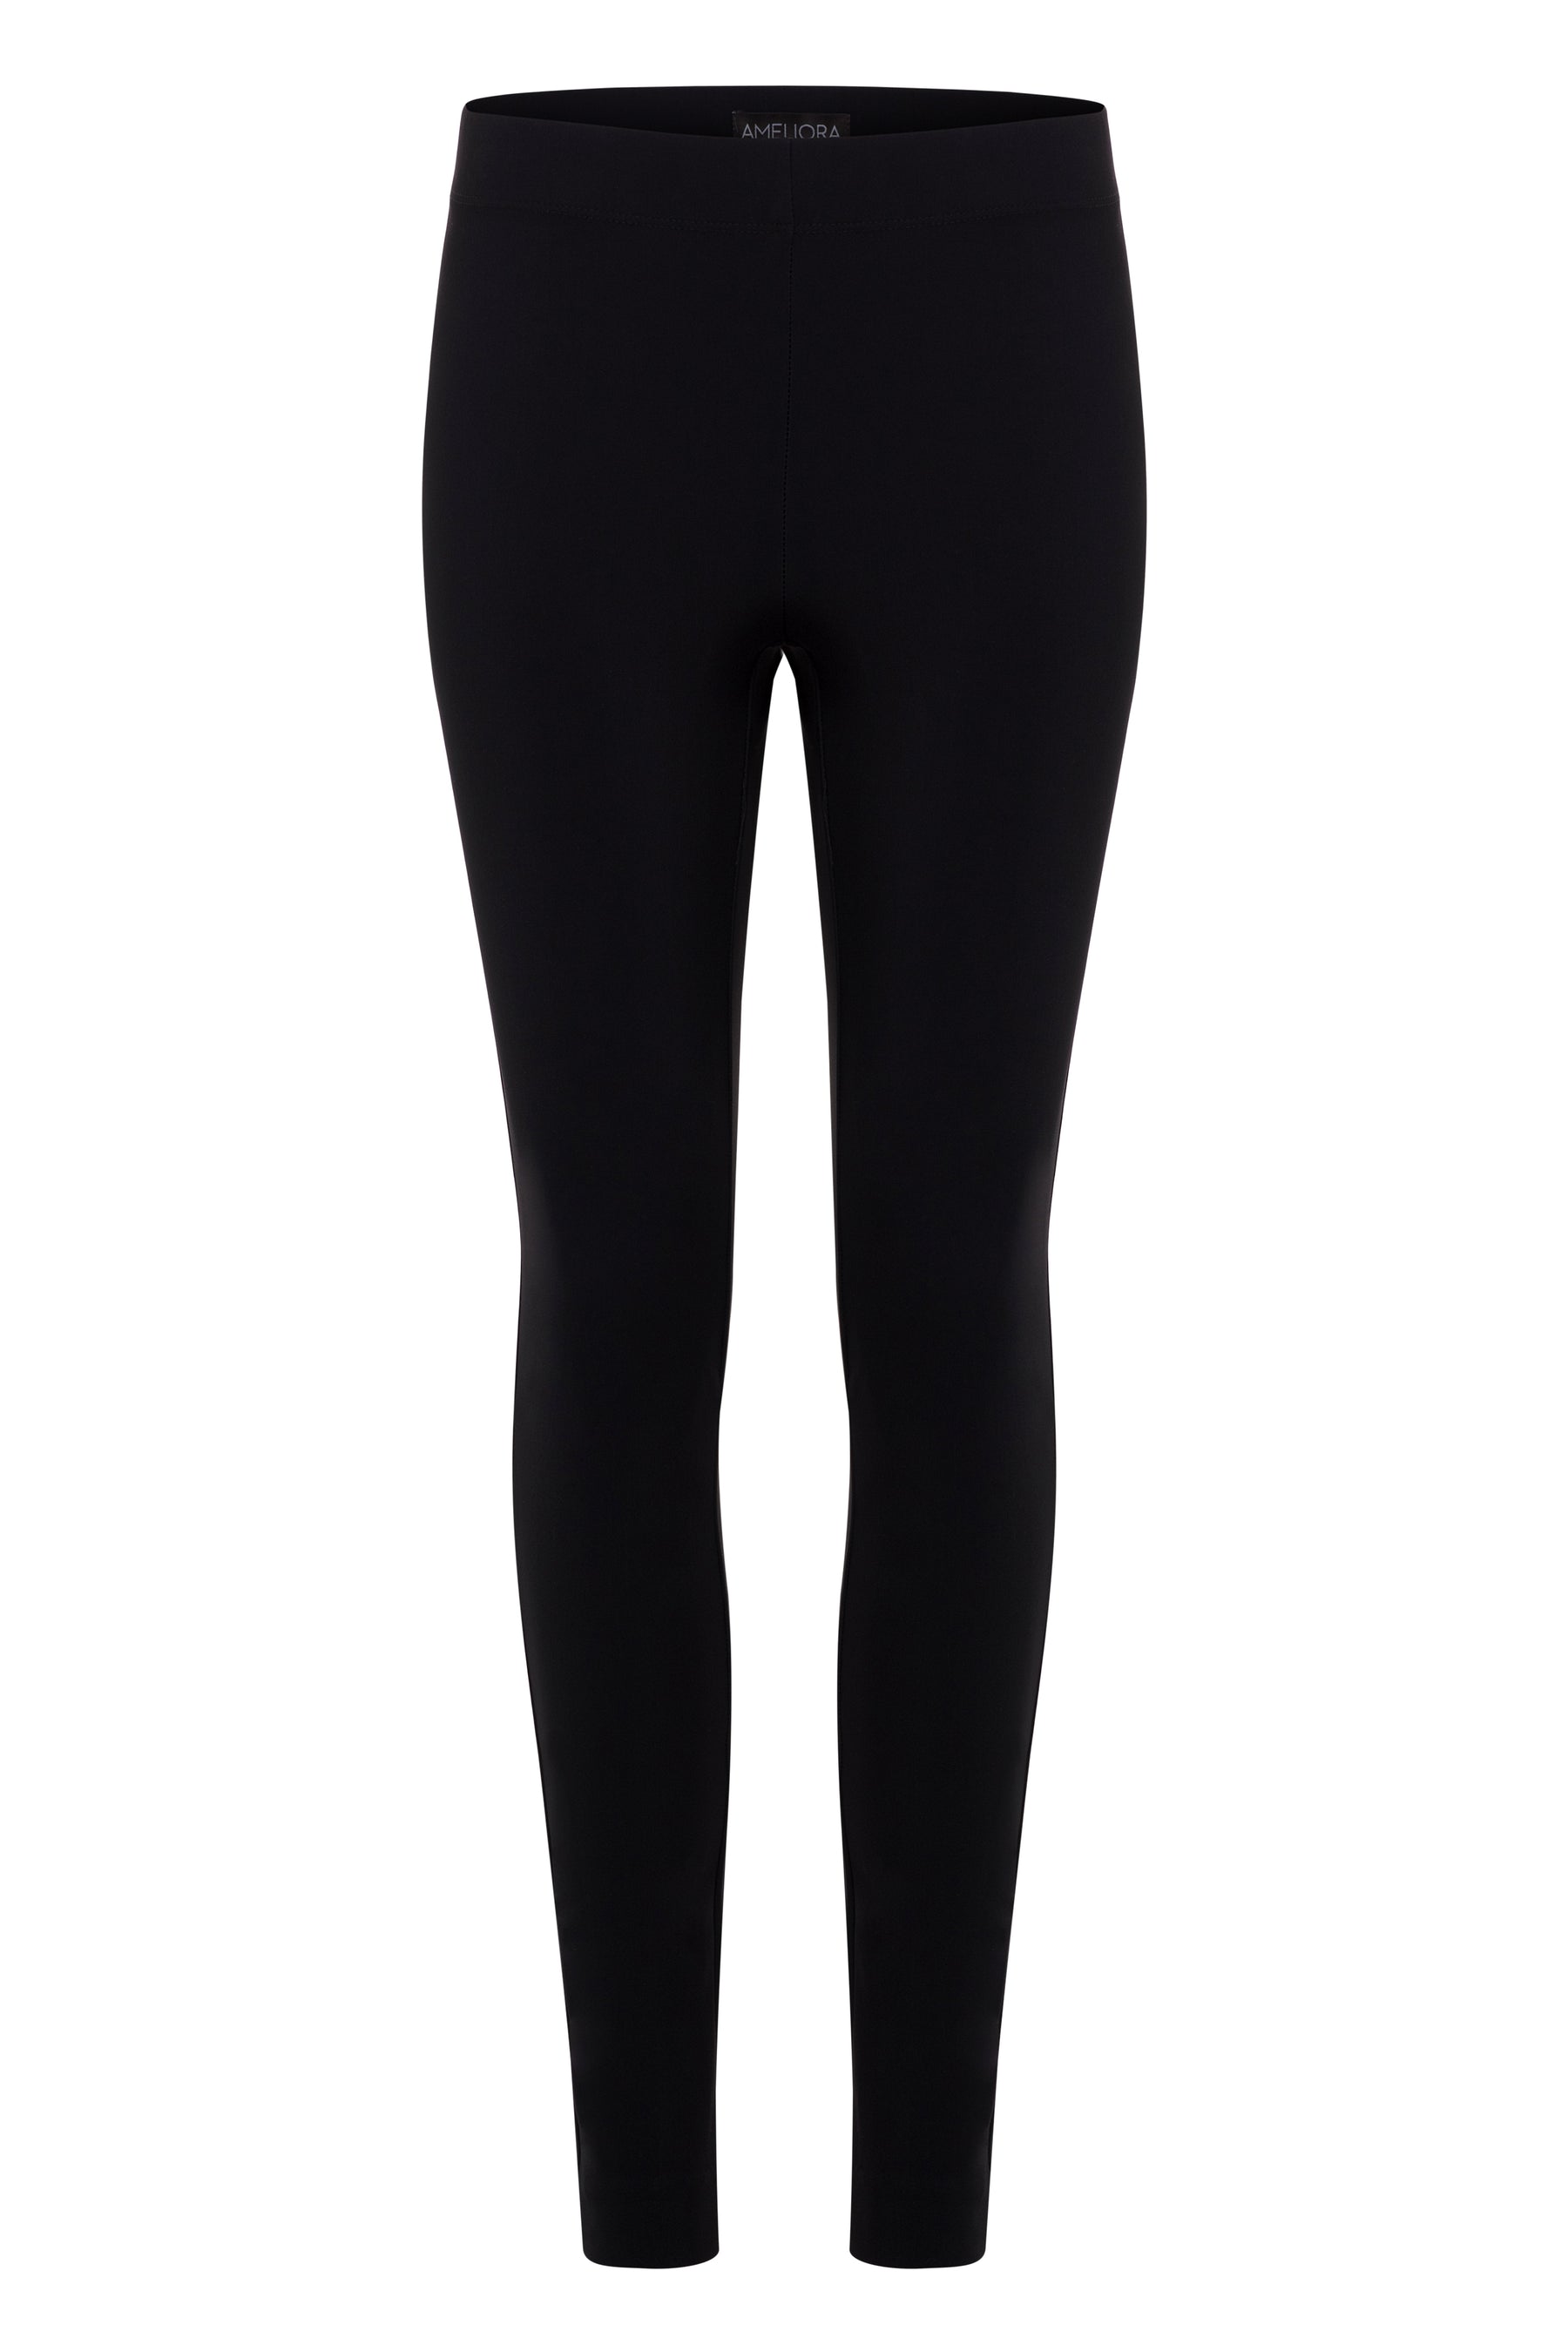 The Stacey - Legging – Ameliora